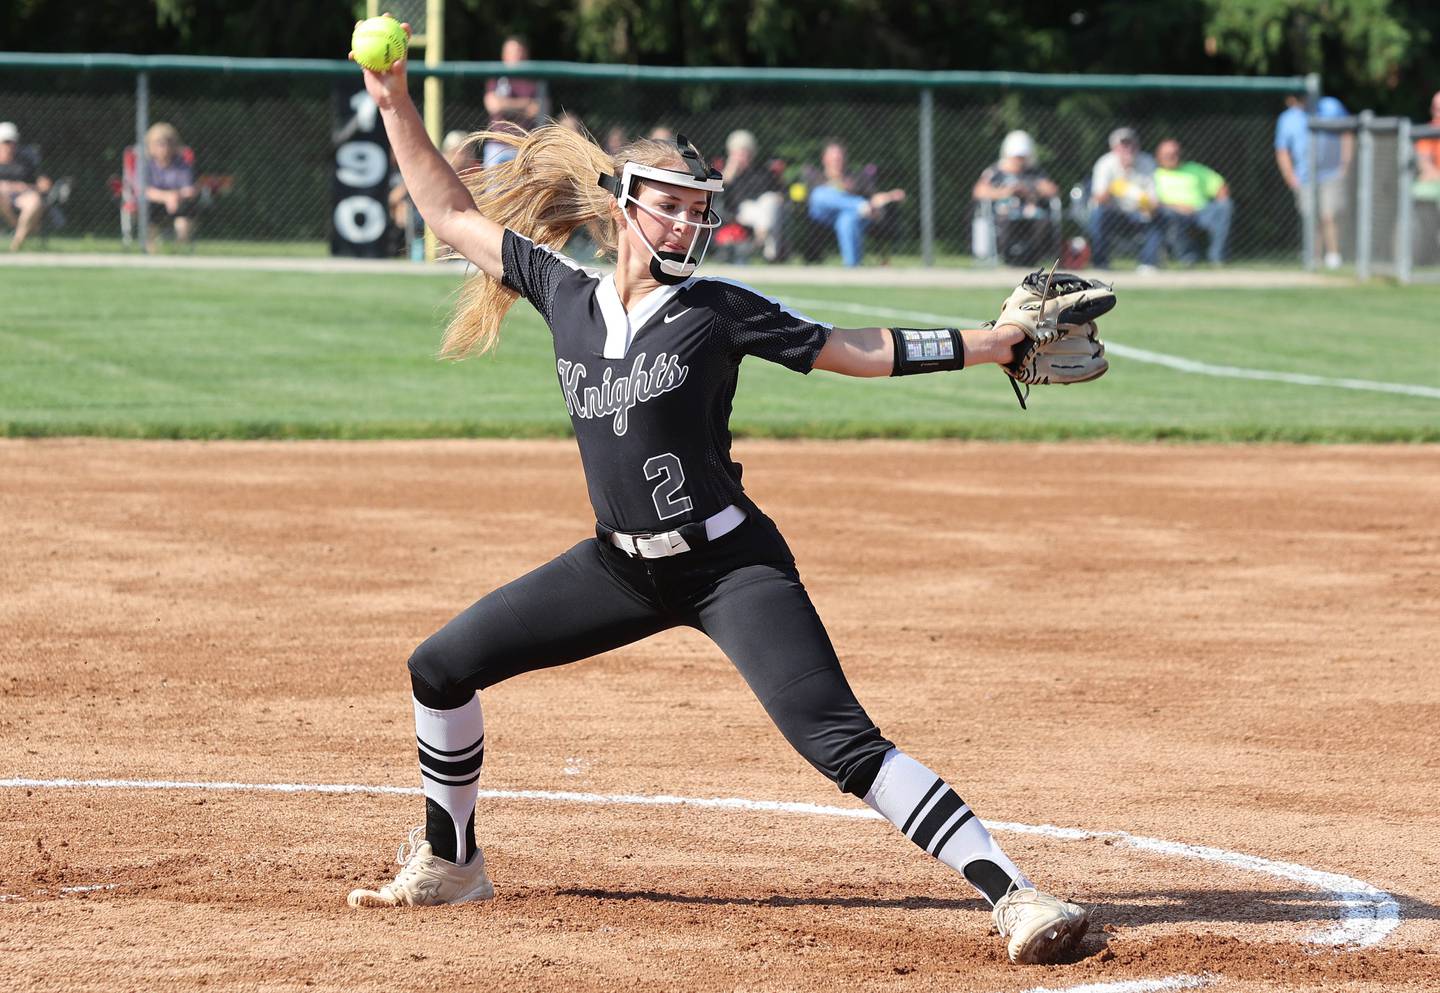 Kaneland's Grace Algrim fires a pitch Tuesday, June 7, 2022, during their IHSA Class 3A supersectional game against Antioch at Kaneland High School in Maple Park.